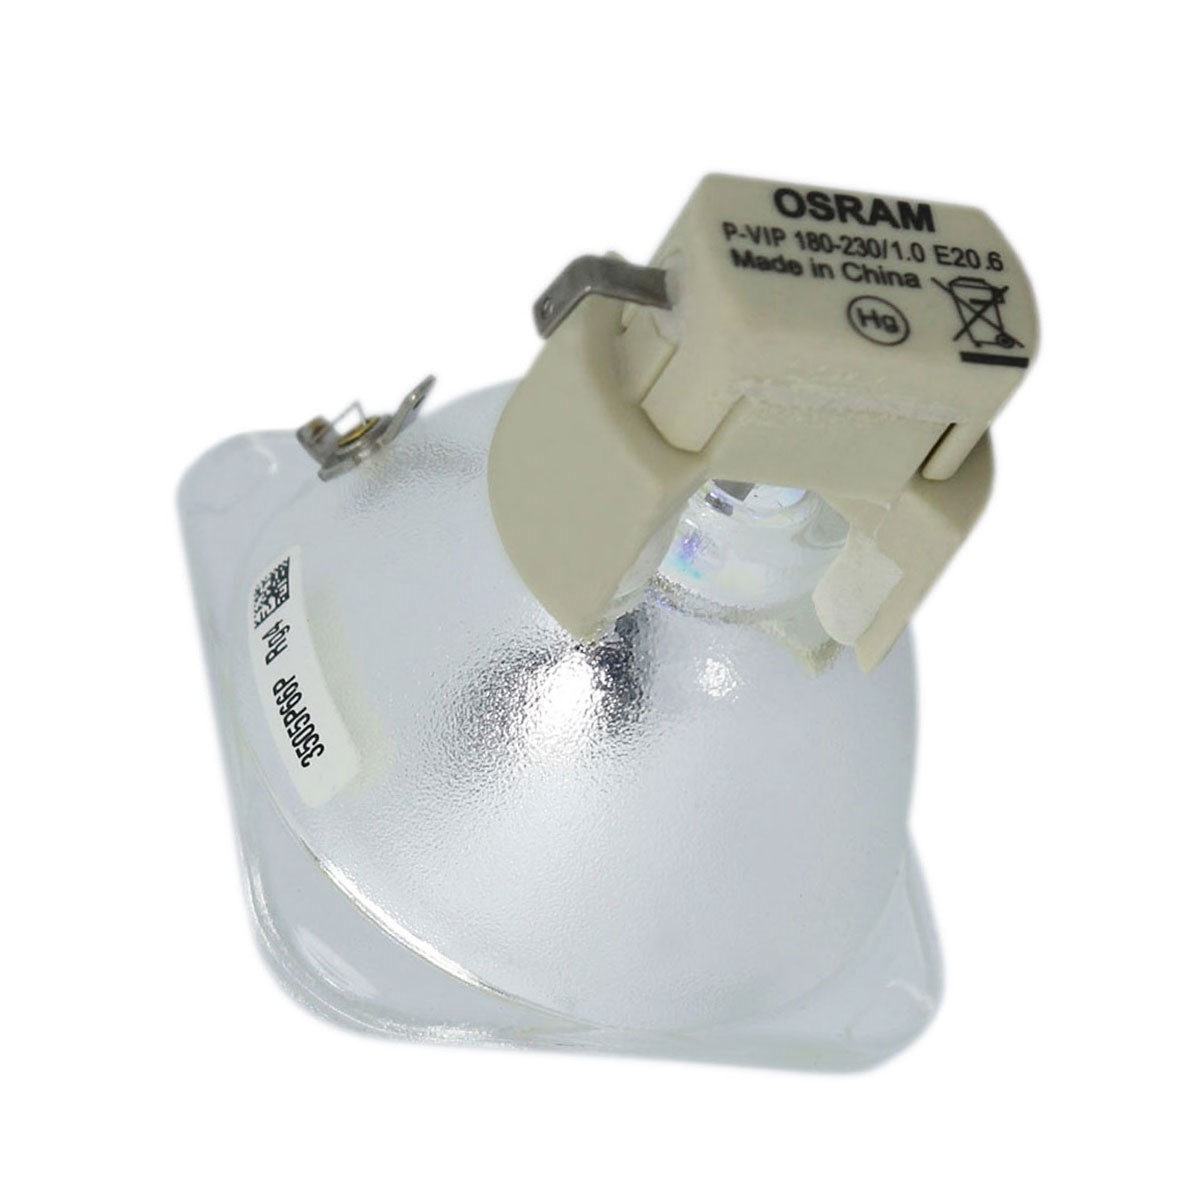 Original Osram Projector Lamp Replacement for BenQ 5J.J4R05.001 (Bulb Only) - image 5 of 6